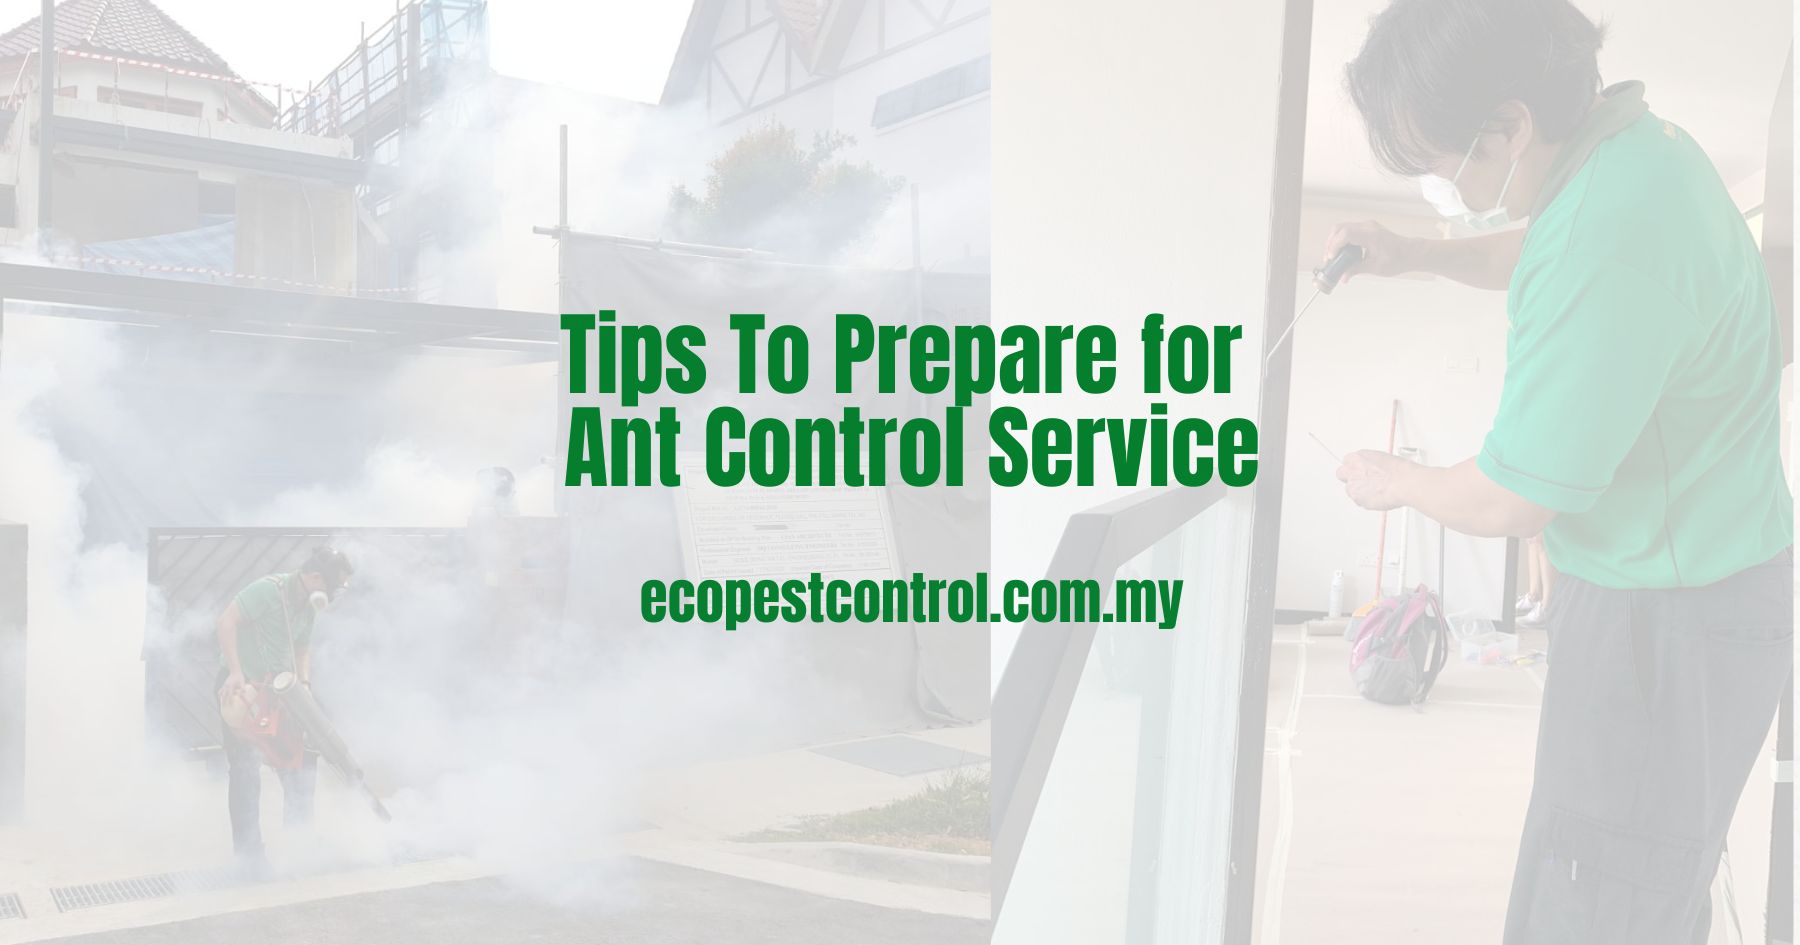 Tips To Prepare for Ant Control Service